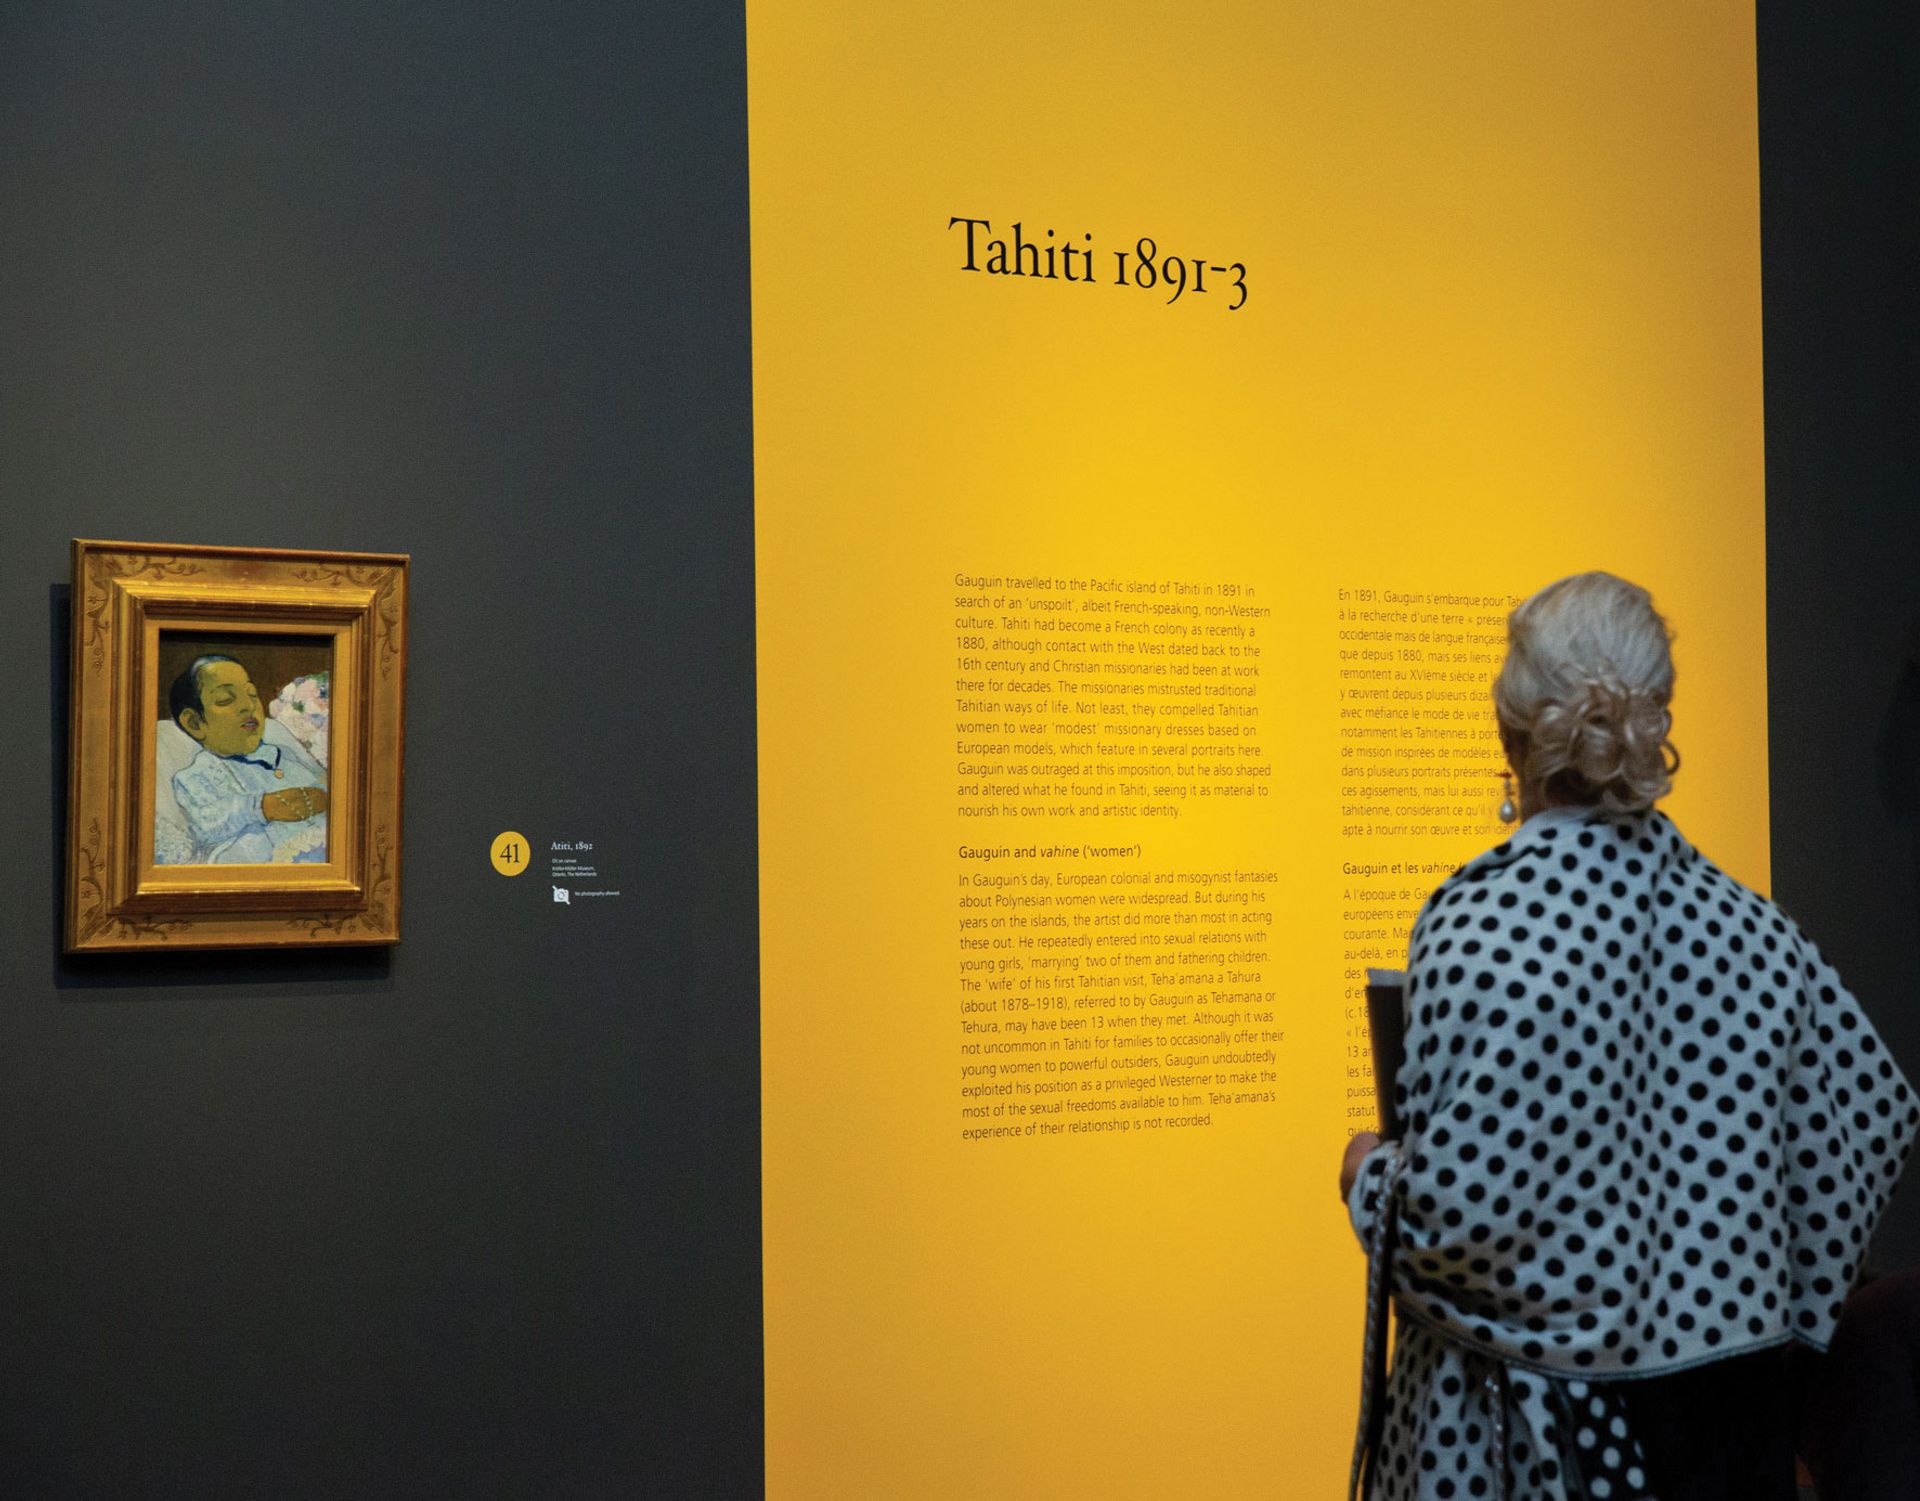 The opening of the National Gallery's Gauguin Portraits exhibition was timed to avoid the expected 31 October Brexit deadline Image: courtesy of Kröller-Müller Museum, Otterlo, photo © The National Gallery, London